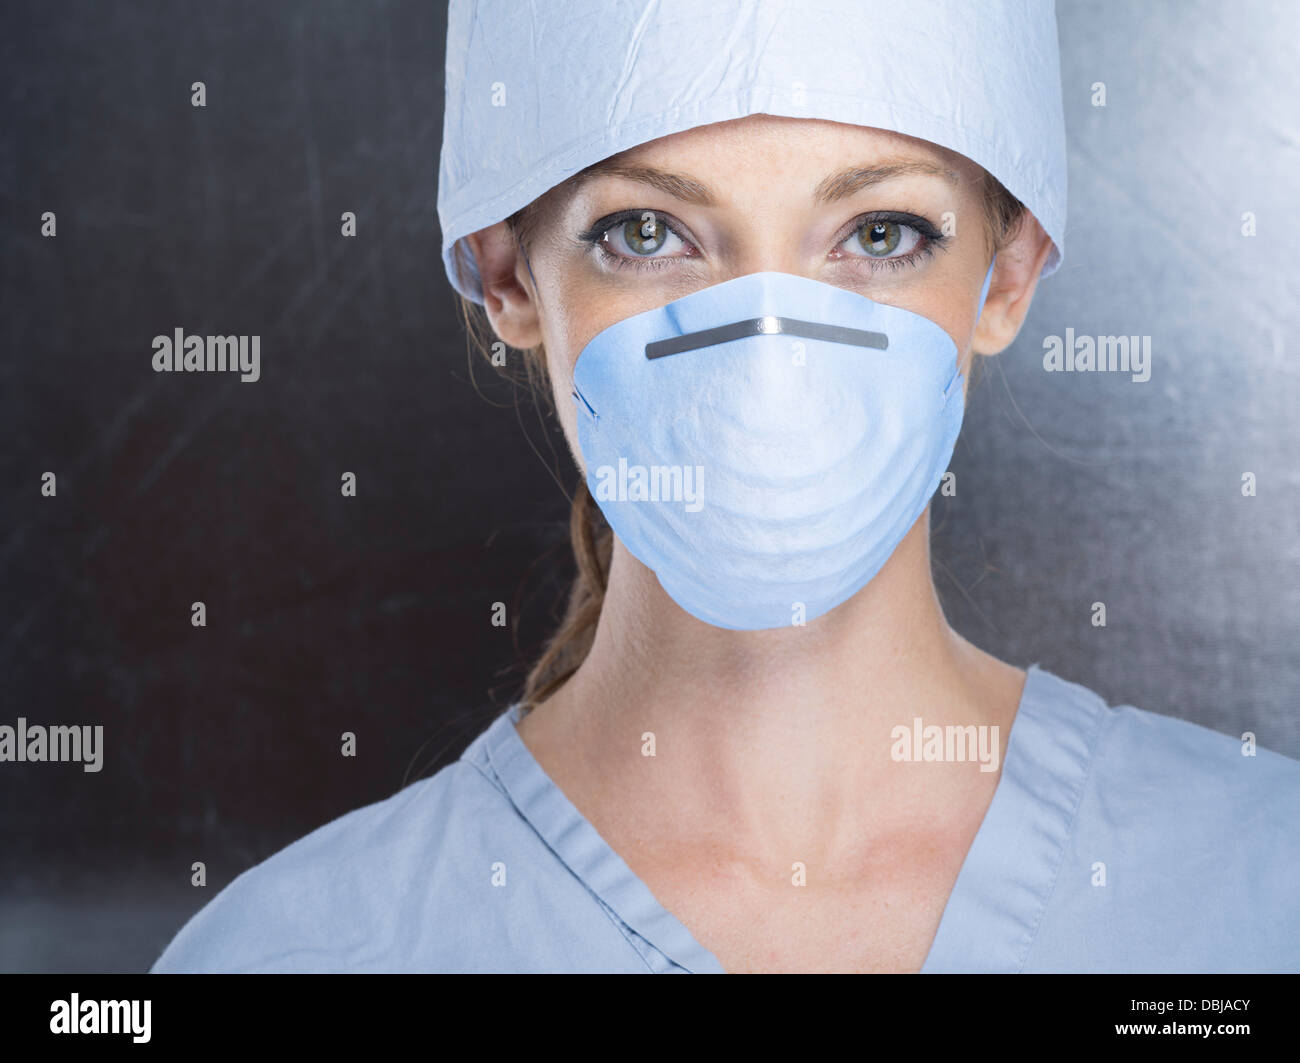 Female medic wearing surgical scrubs cap and mask Stock Photo